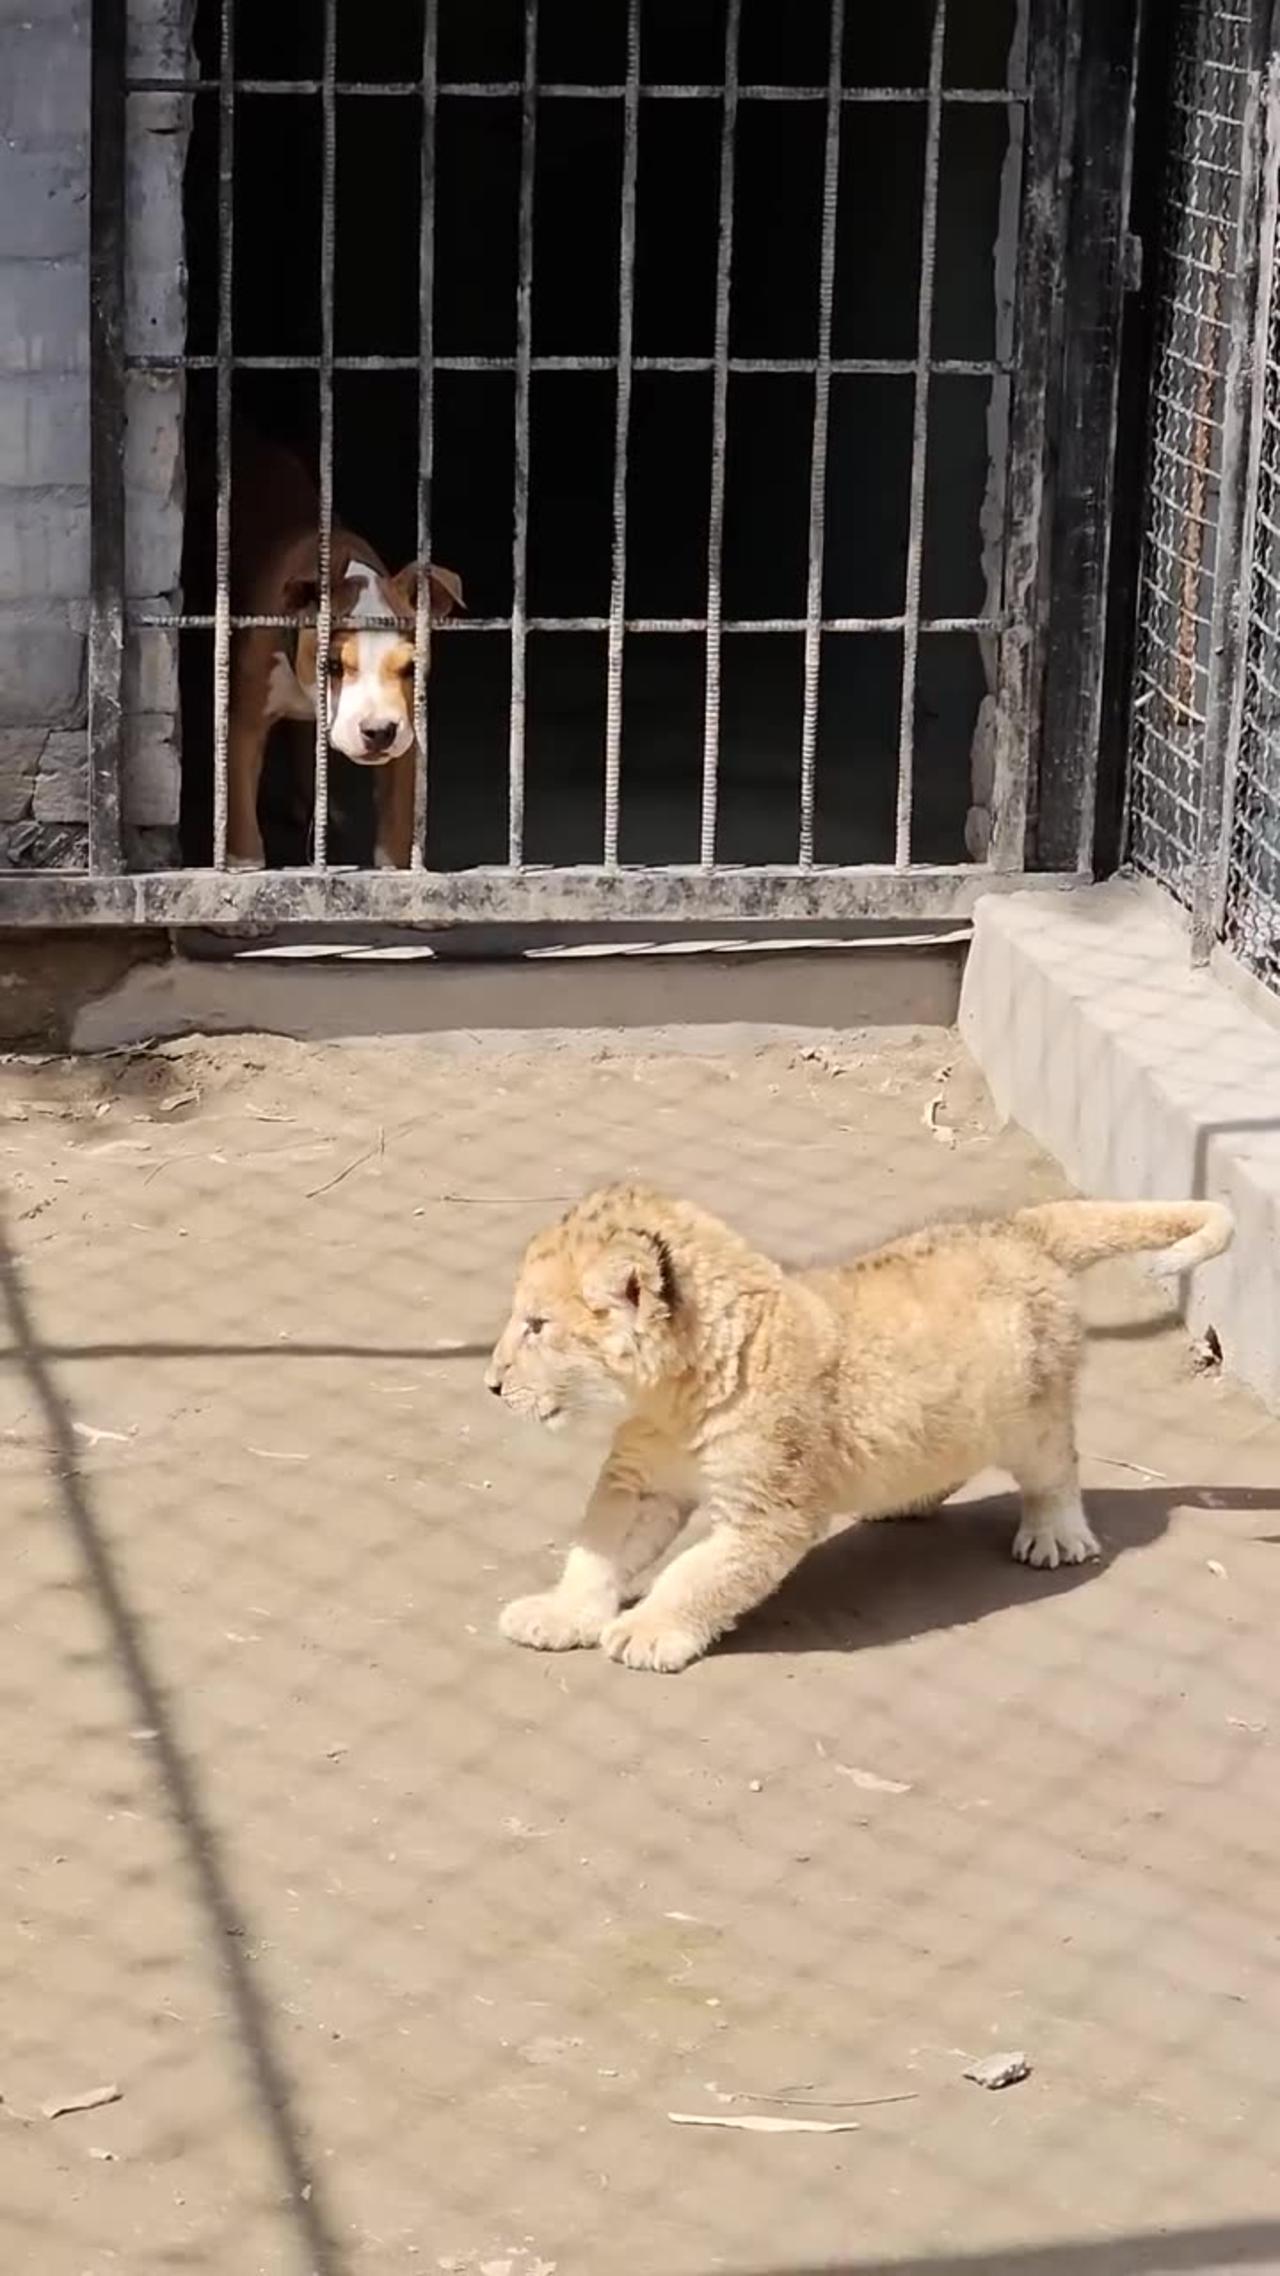 Dog want to Play with Little Lion Cub. Mrizhanwaqas143